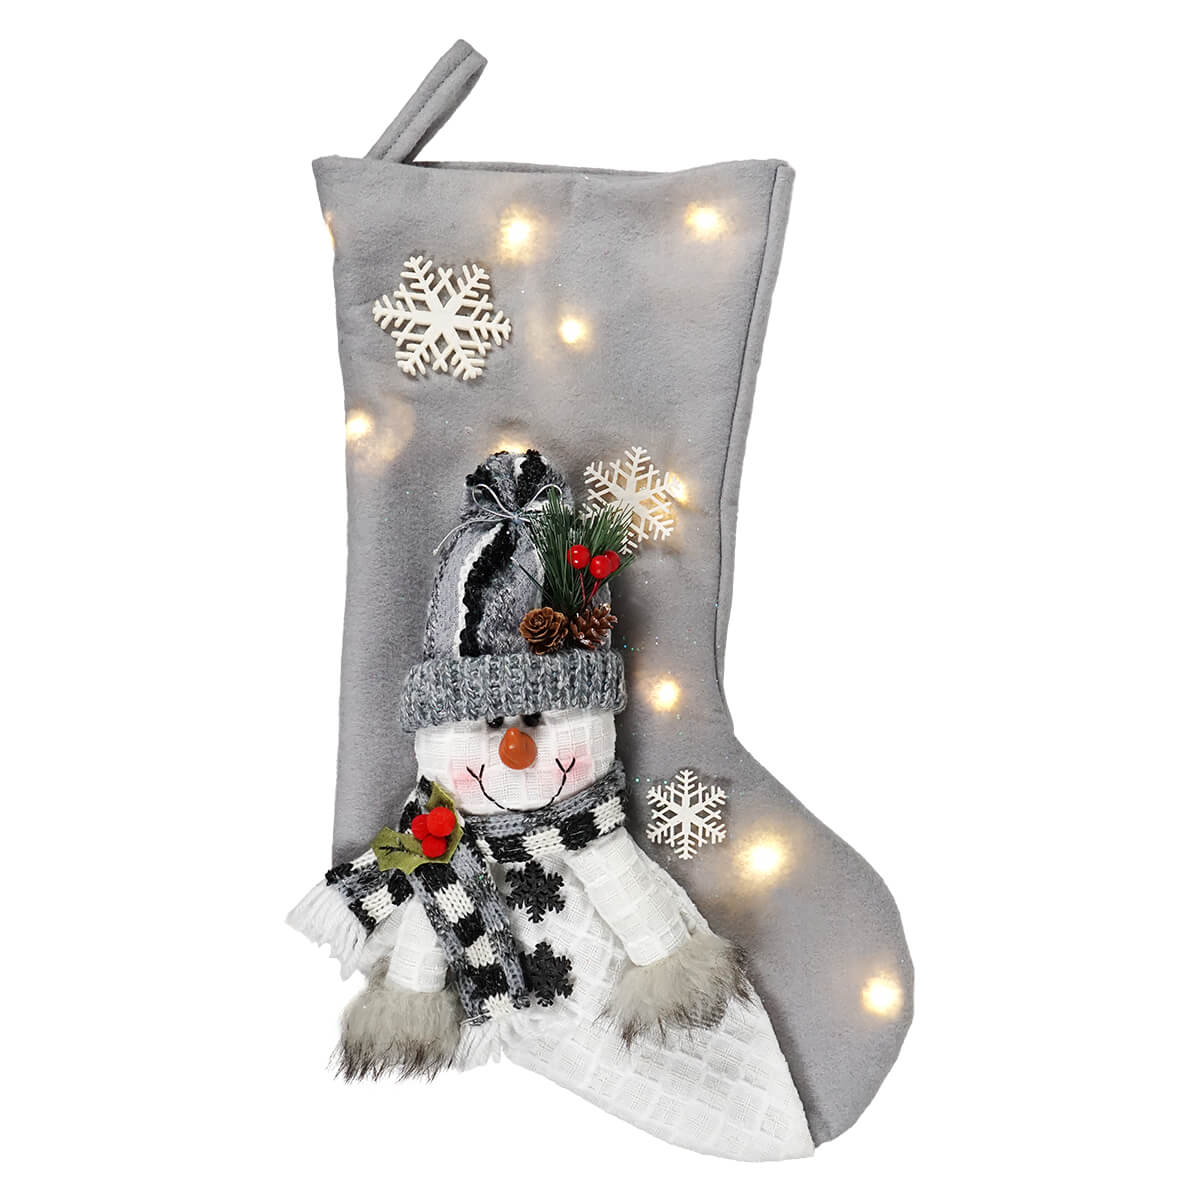 Lighted Fabric Snowman in Scarf Snowflake Stocking